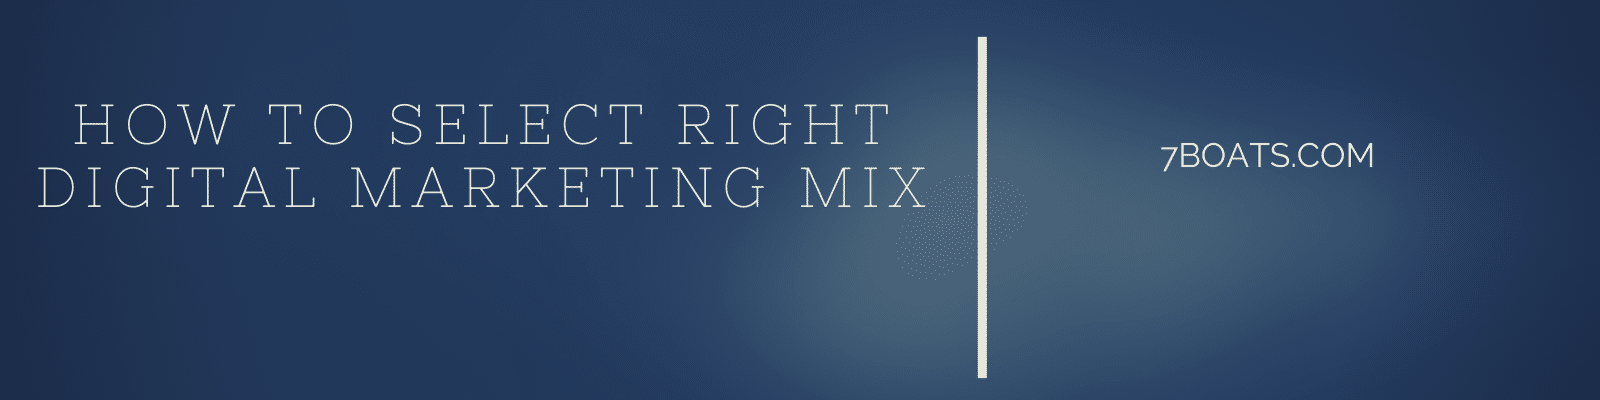 how to create right digital marketing mix - 7boats